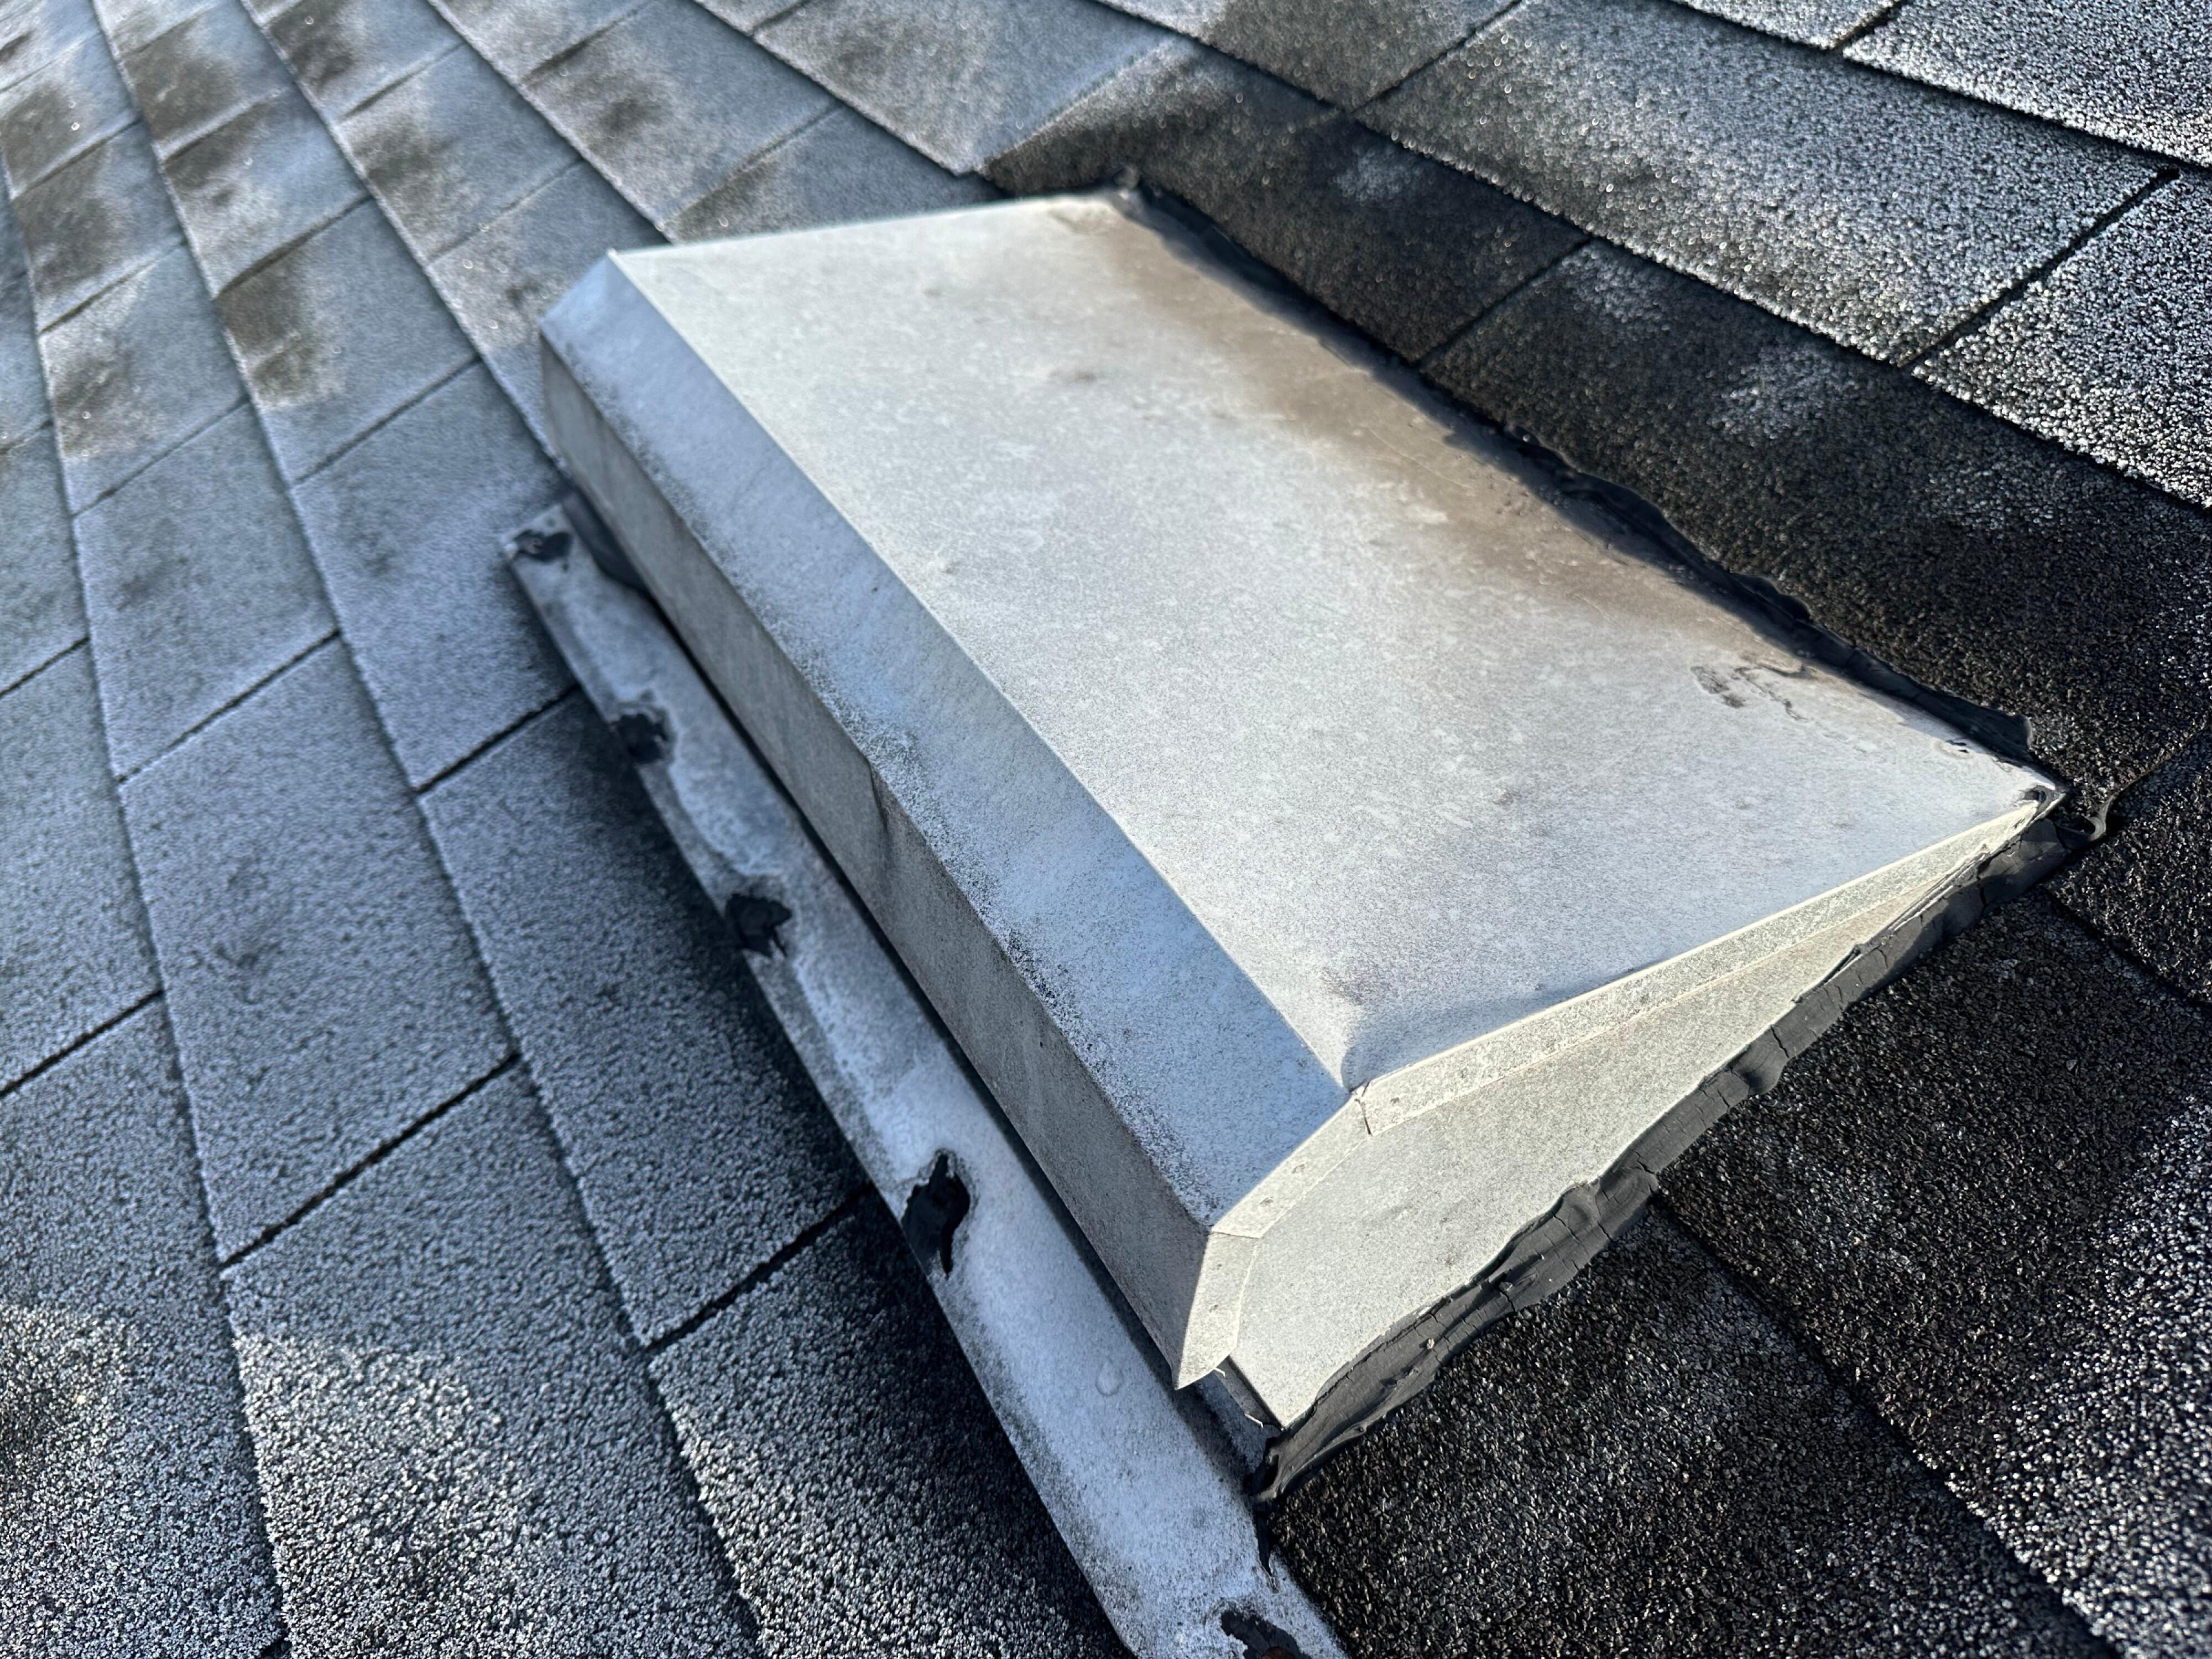 Hail damage found on soft metals and roof